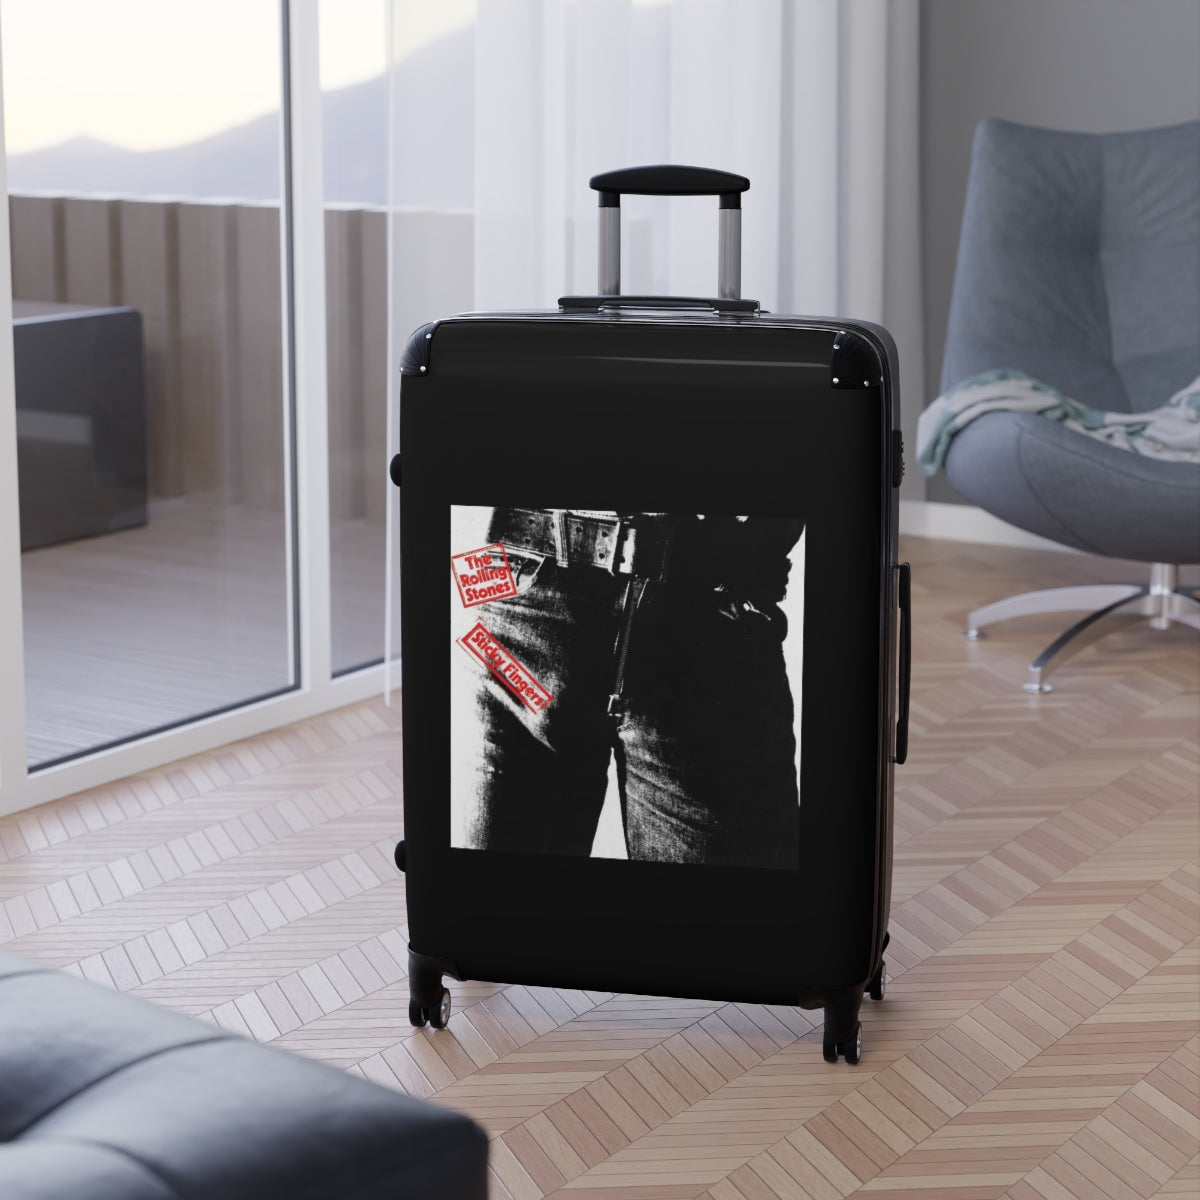 Getrott The Rolling Stones Sticky Fingers 1971 Black Cabin Suitcase Inner Pockets Extended Storage Adjustable Telescopic Handle Inner Pockets Double wheeled Polycarbonate Hard-shell Built-in Lock